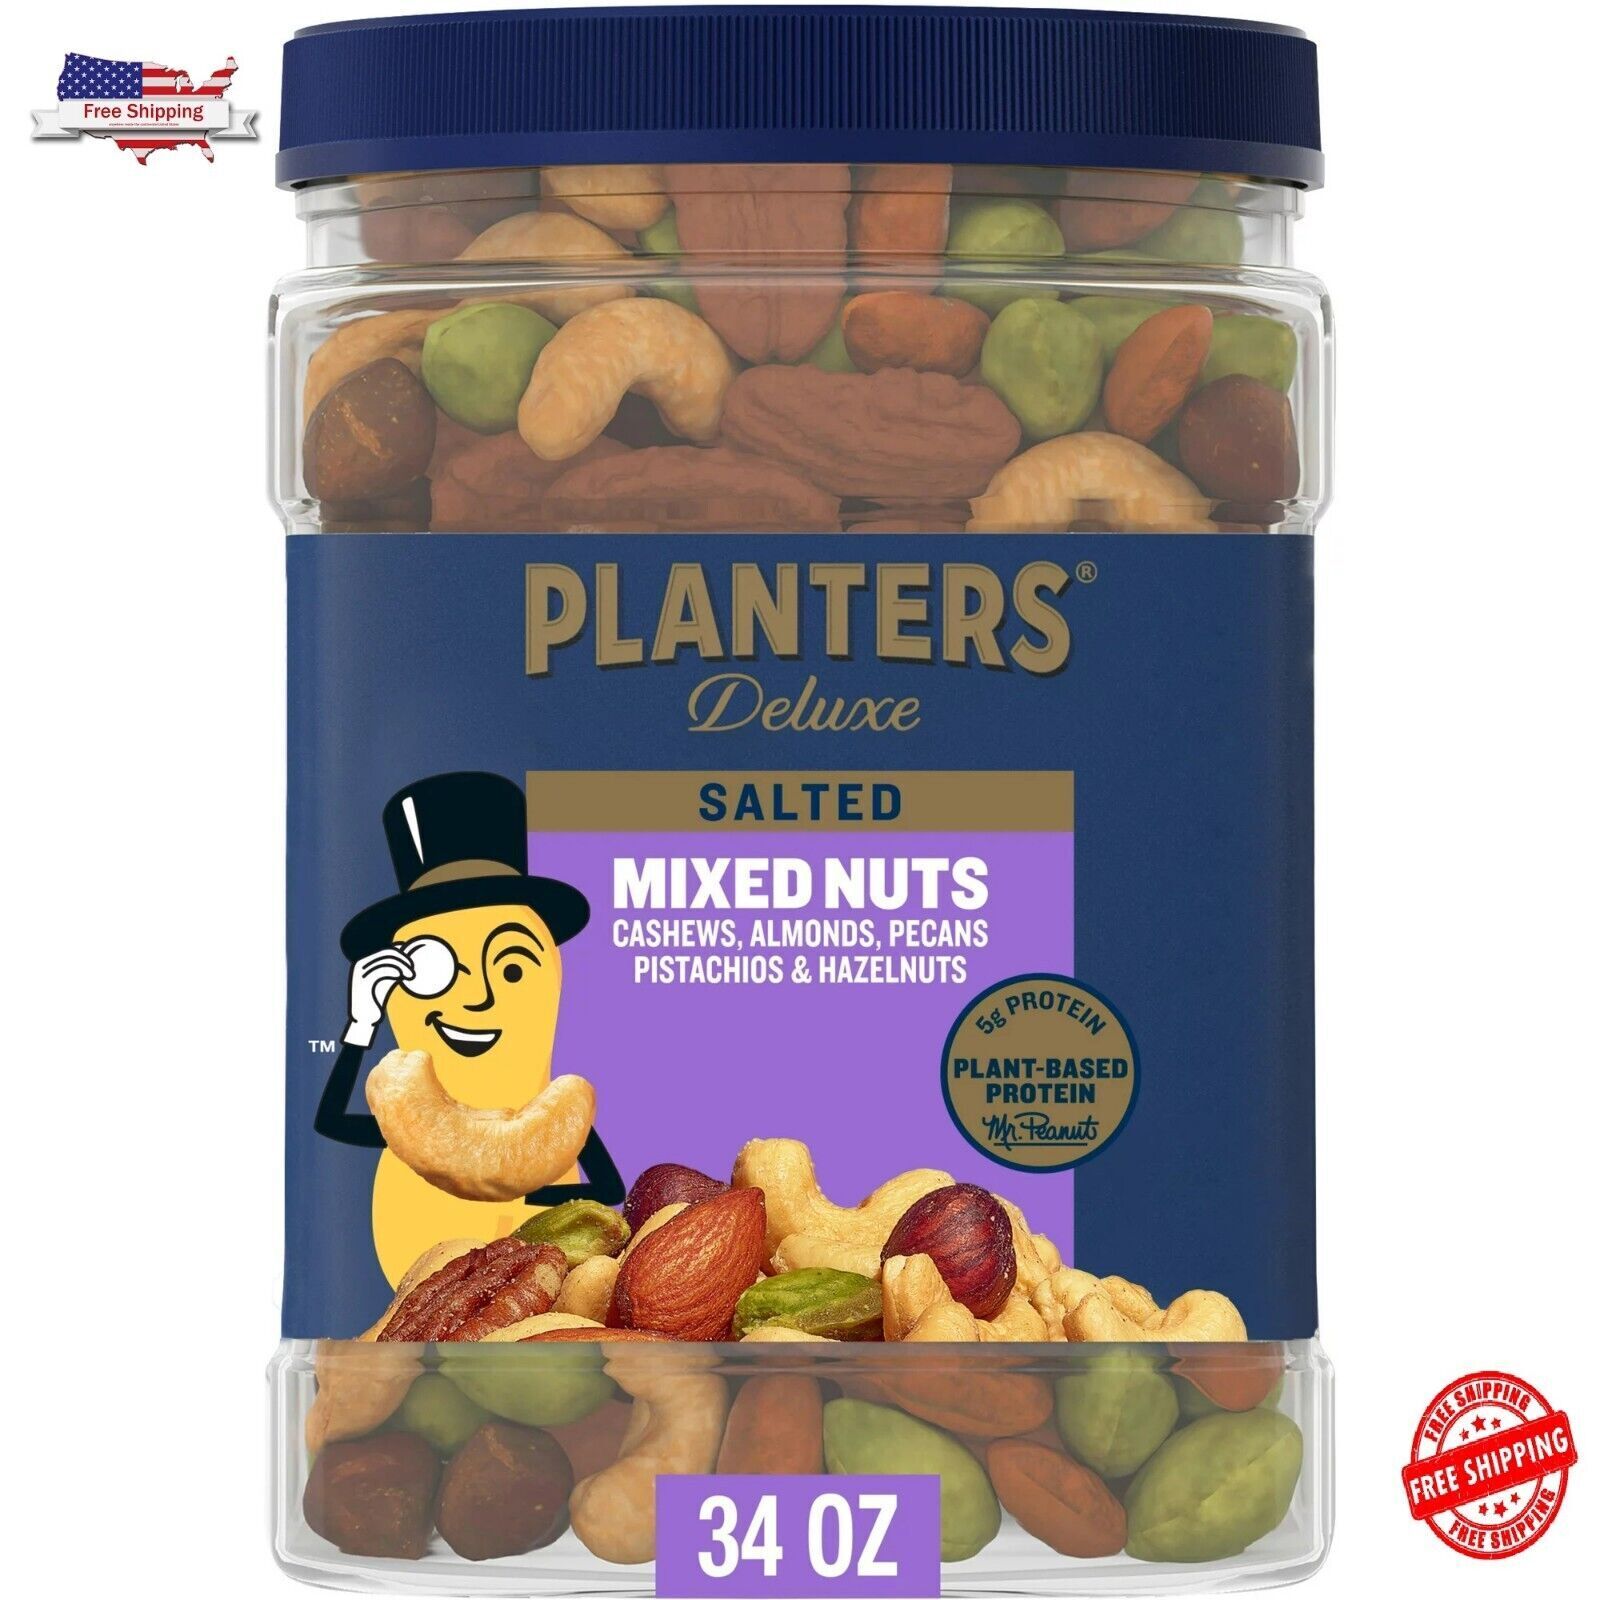 PLANTERS Deluxe Salted Mixed Nuts, Party Snacks, Plant-Based Protein 34oz..